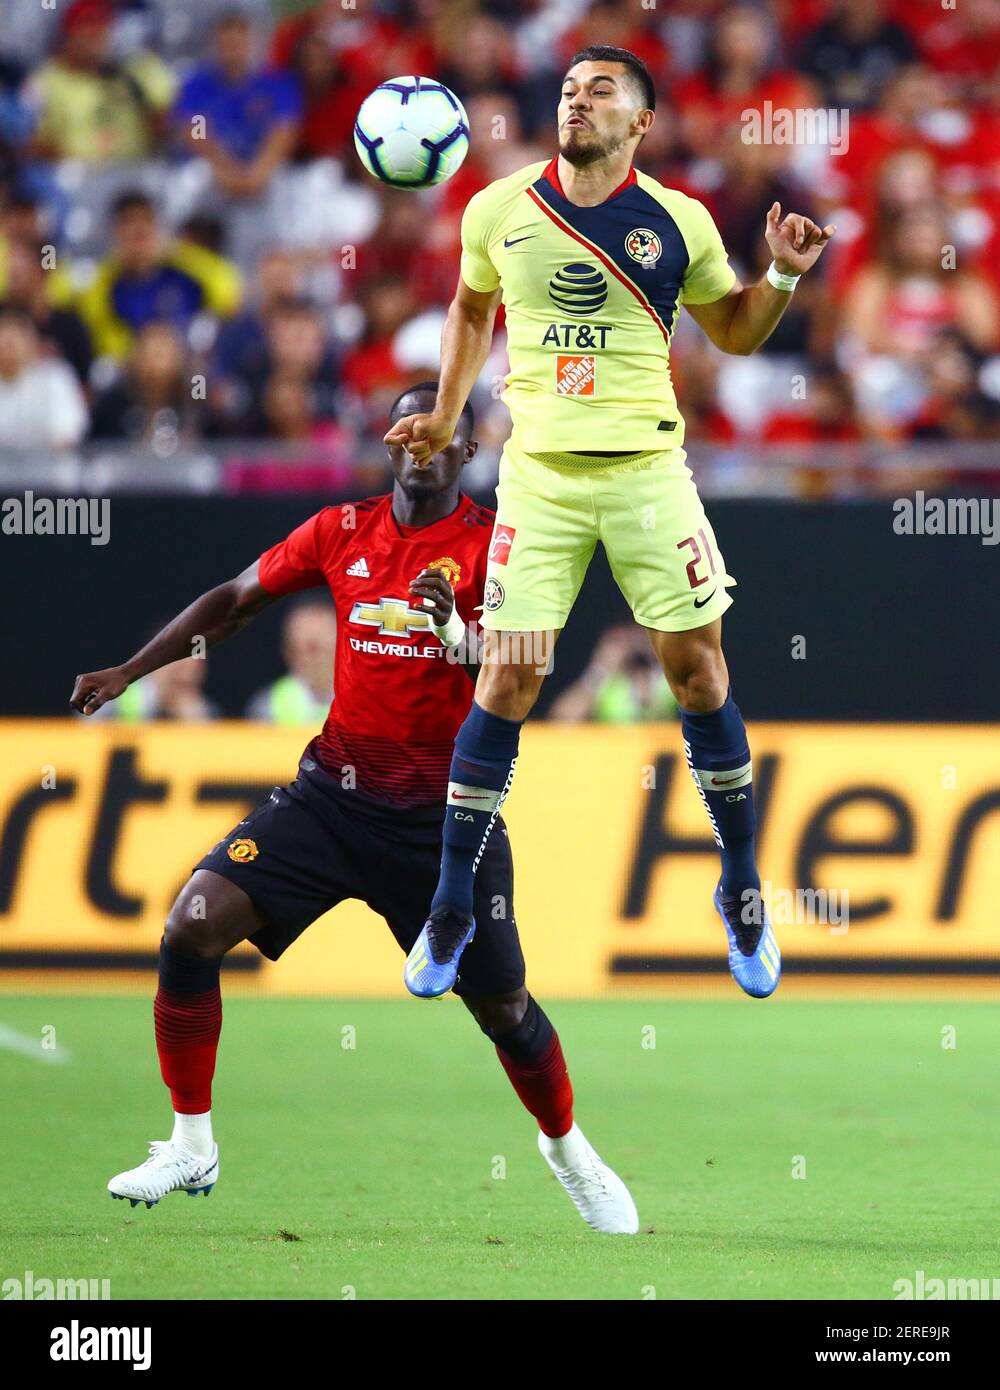 Jul 19, 2018; Glendale, AZ, USA; Club America forward Henry Martin (21)  leaps to stop the ball against Manchester United during the first half of  an international friendly soccer match at University